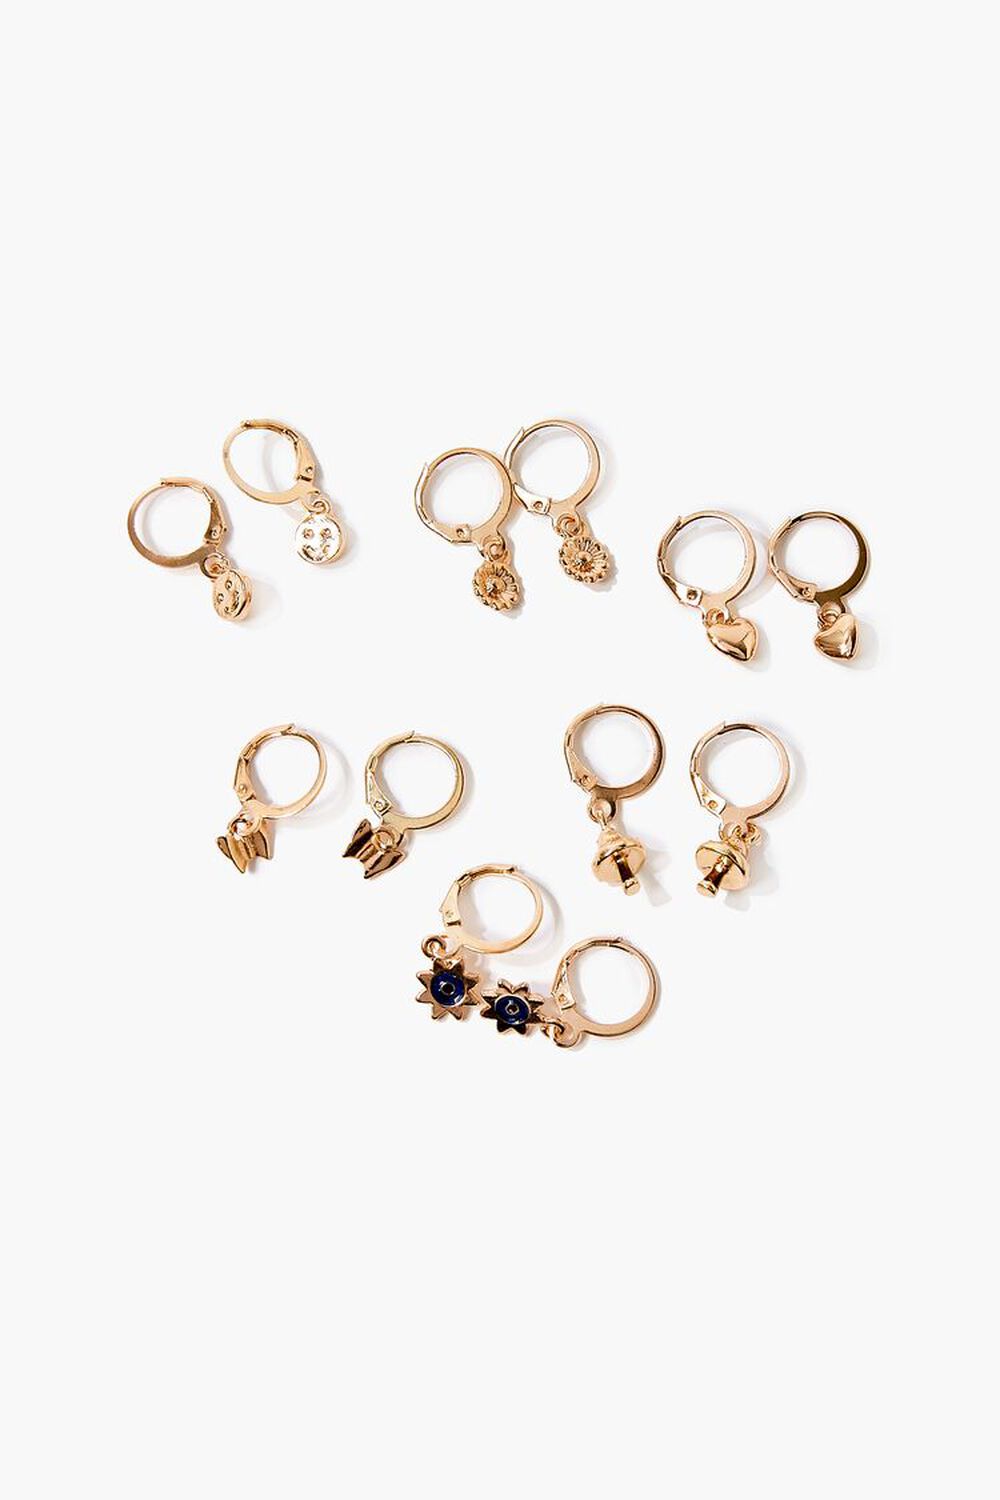 GOLD Happy Face Charm Hoop Earring Set, image 1